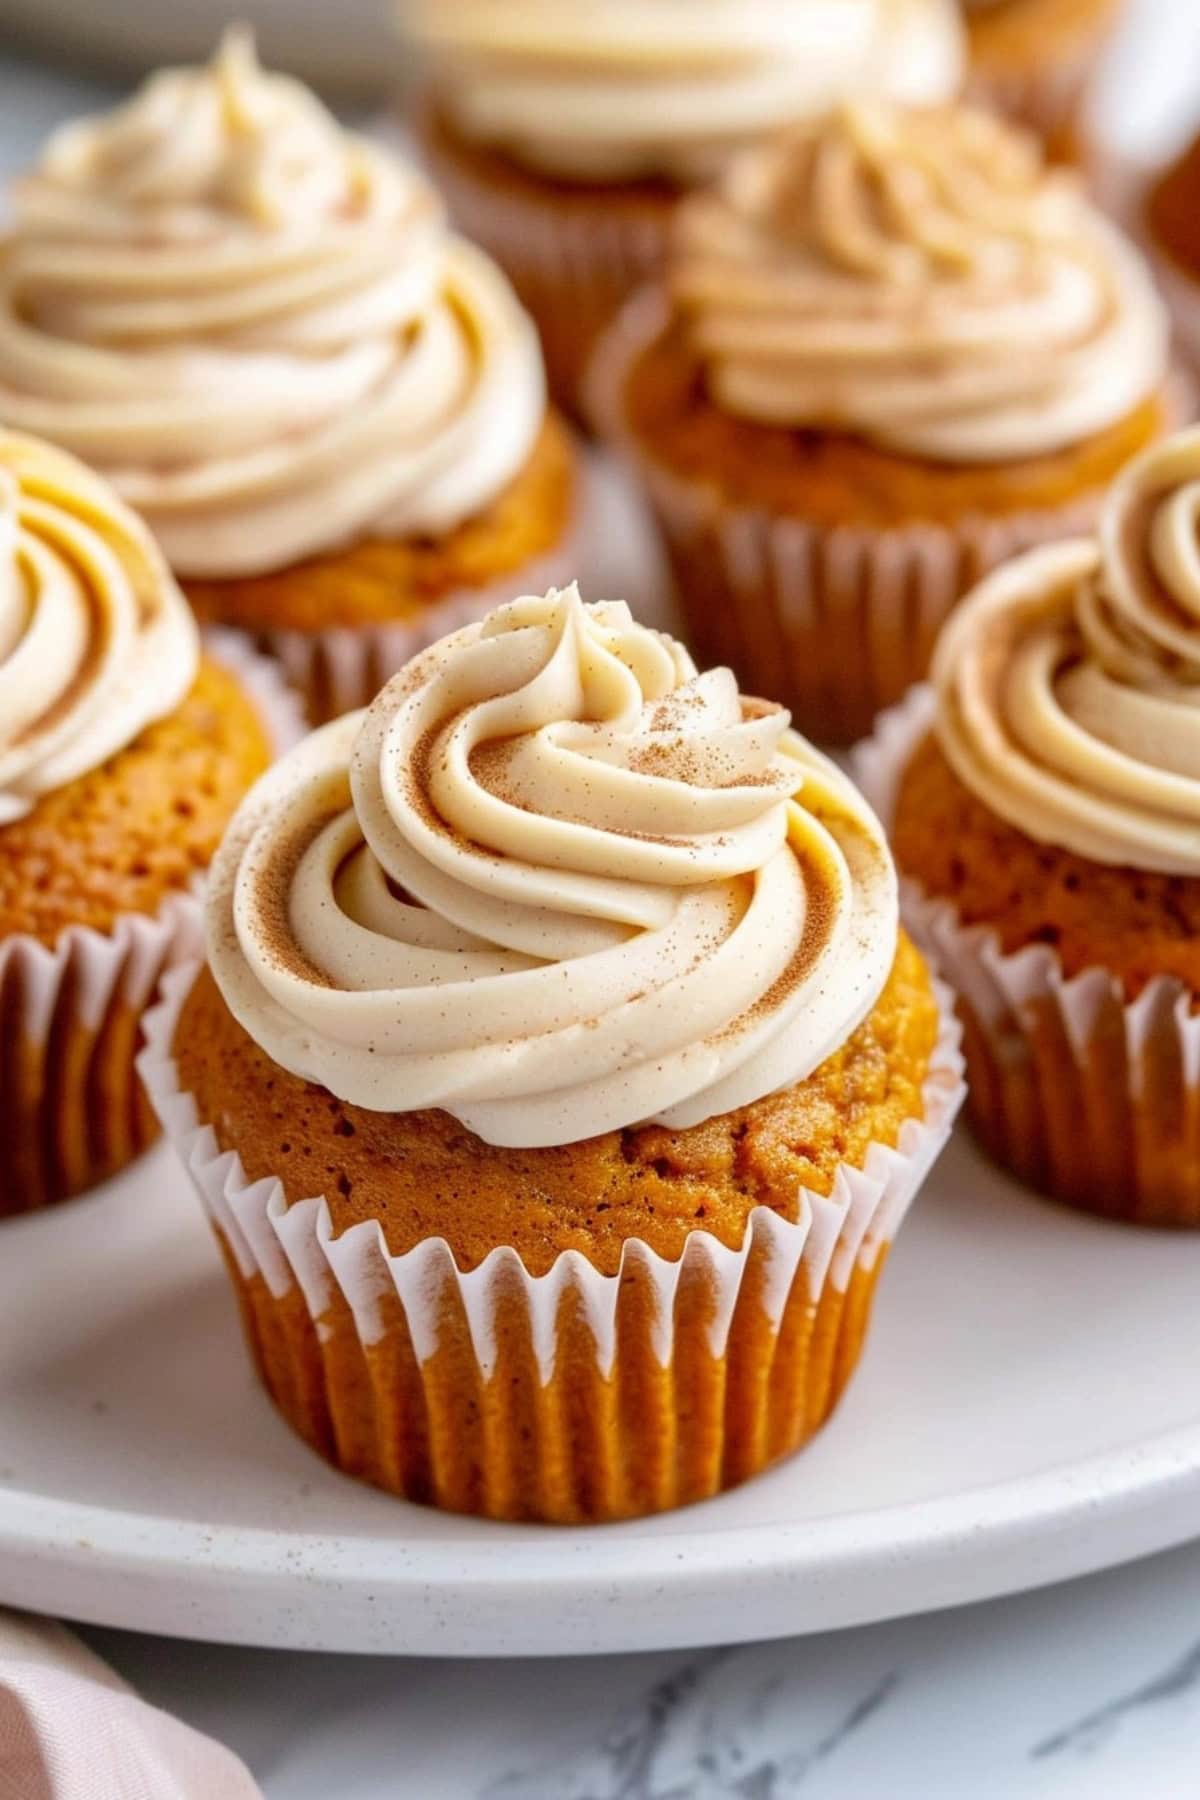 Pumpkin cupcakes with cream cheese frosting and sprinkle of pumpkin spice arranged in a white plate.